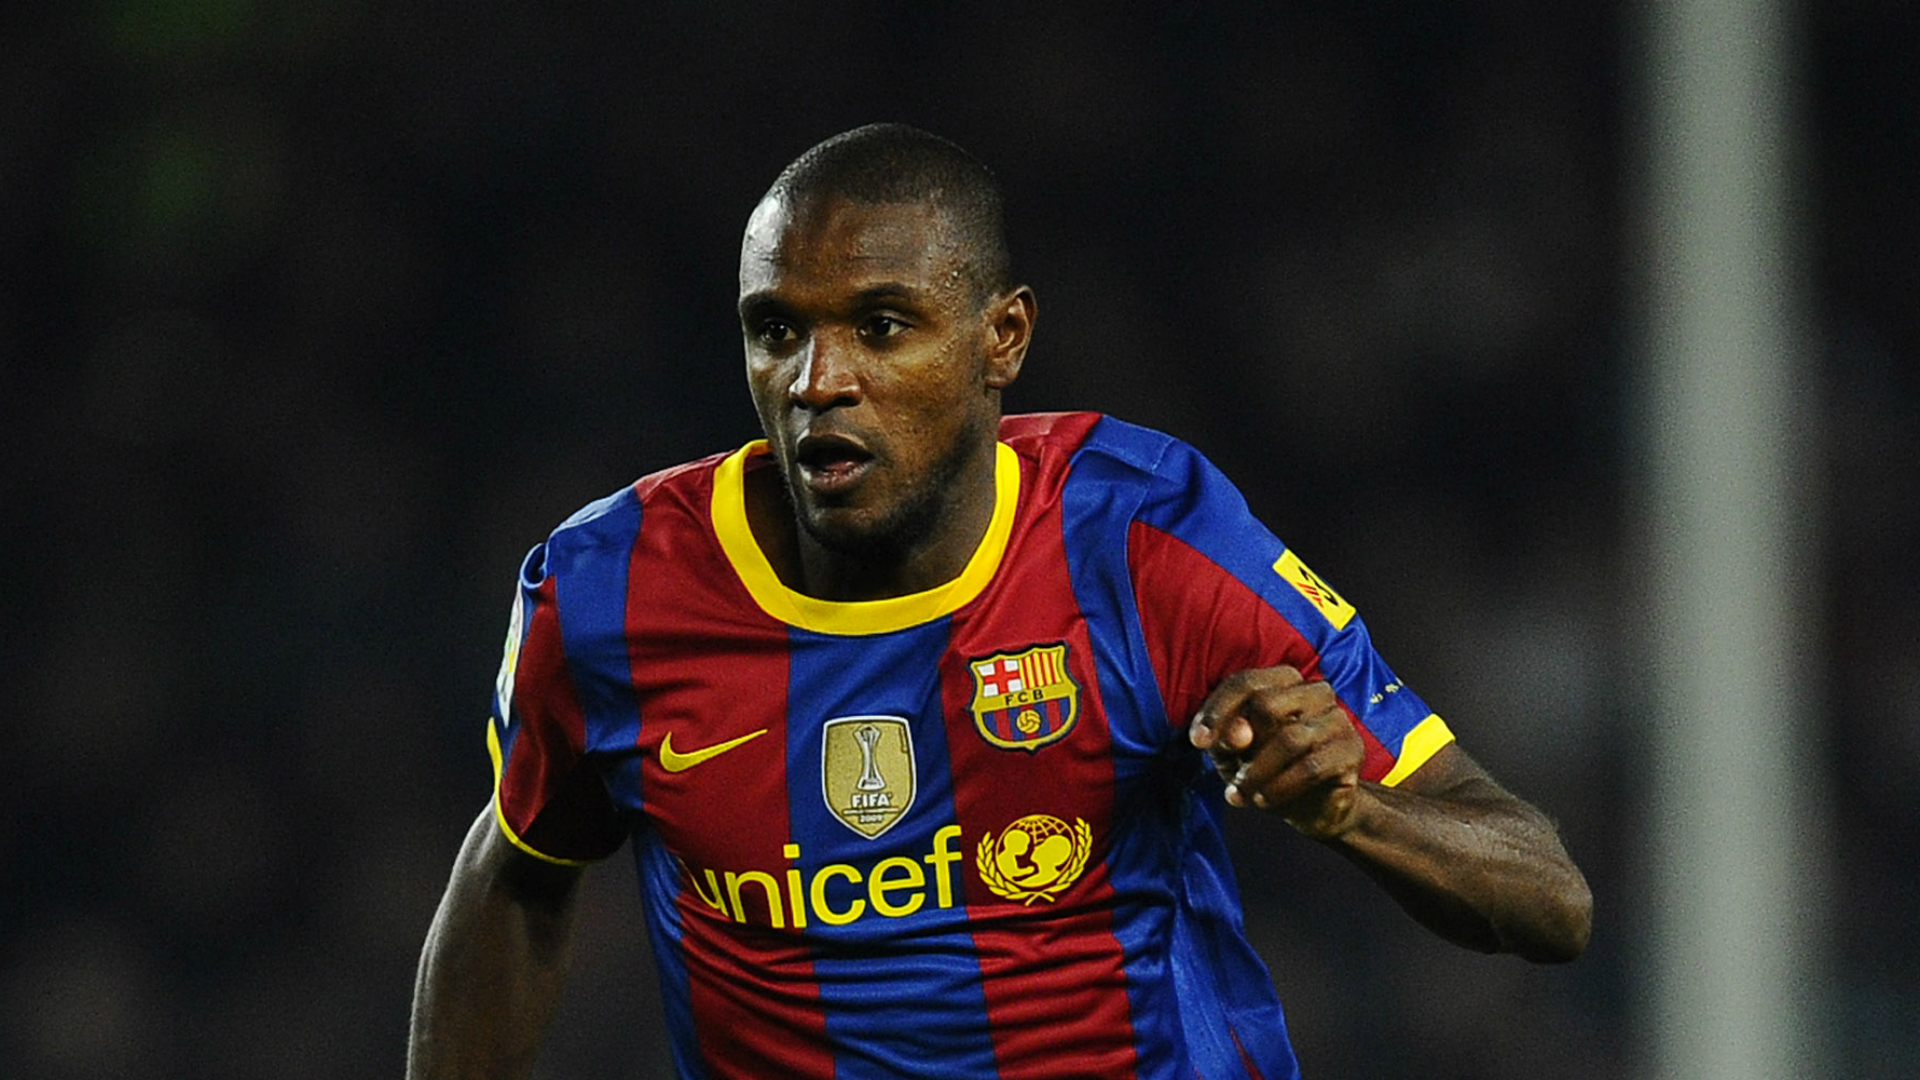 Post dedicated to Eric Abidal, a person who gave everything as a player and as a directive